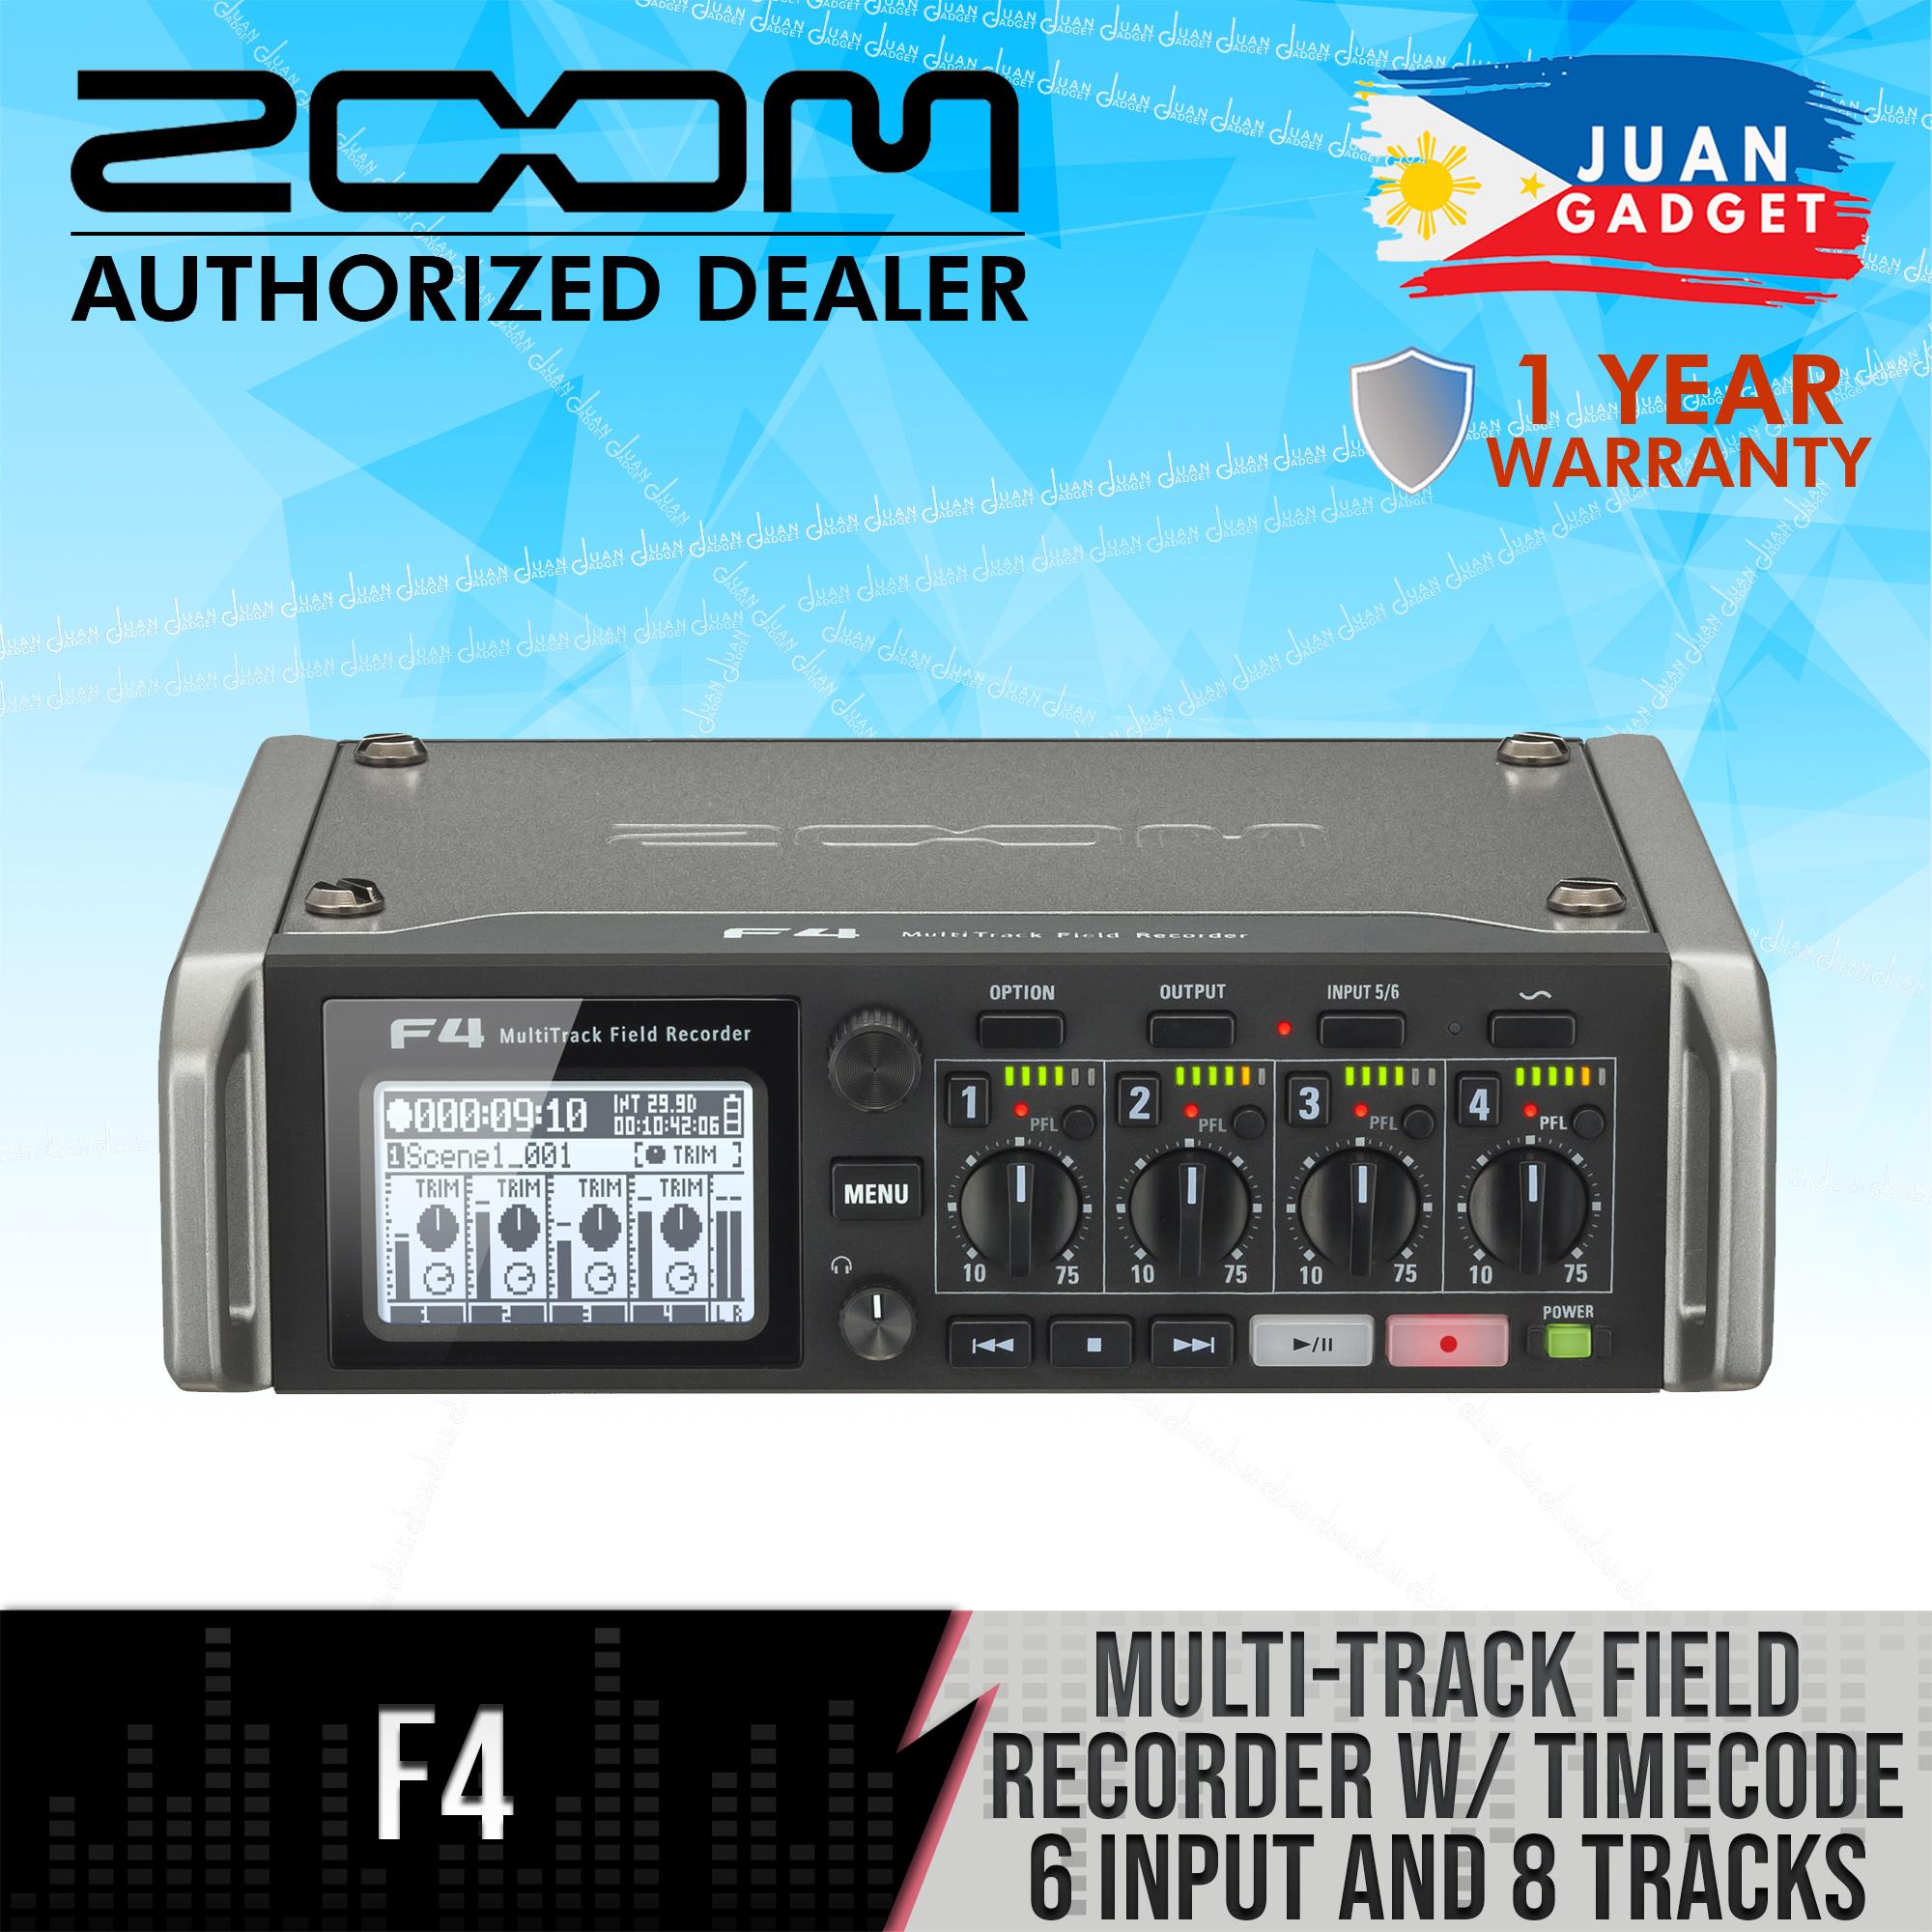 New Zoom F4 Multitrack Field Recorder Timecode  6 Inputs Dealer 8 Tracks Auth 